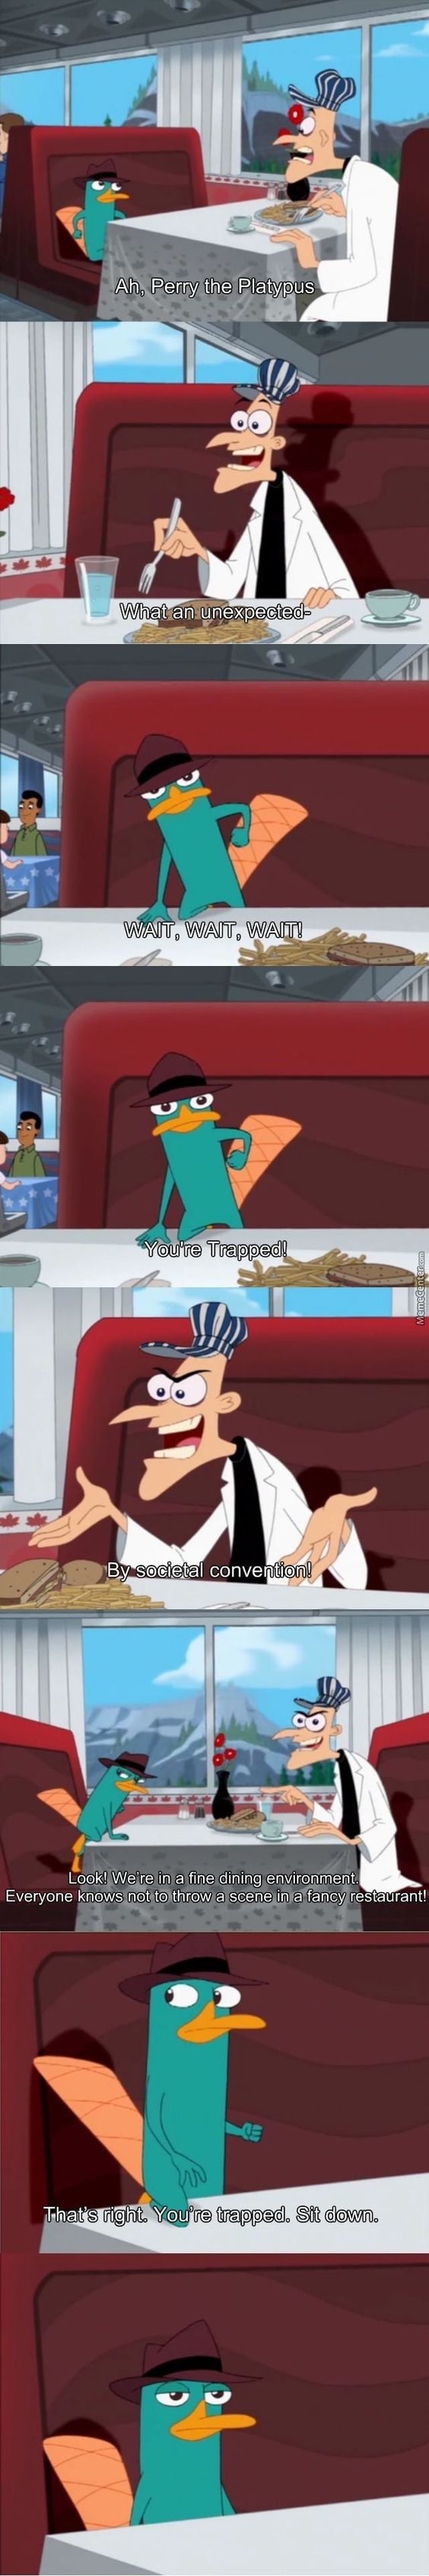 Animated characters from &quot;Phineas and Ferb&quot; engaging in conversation, including Perry the Platypus as Agent P